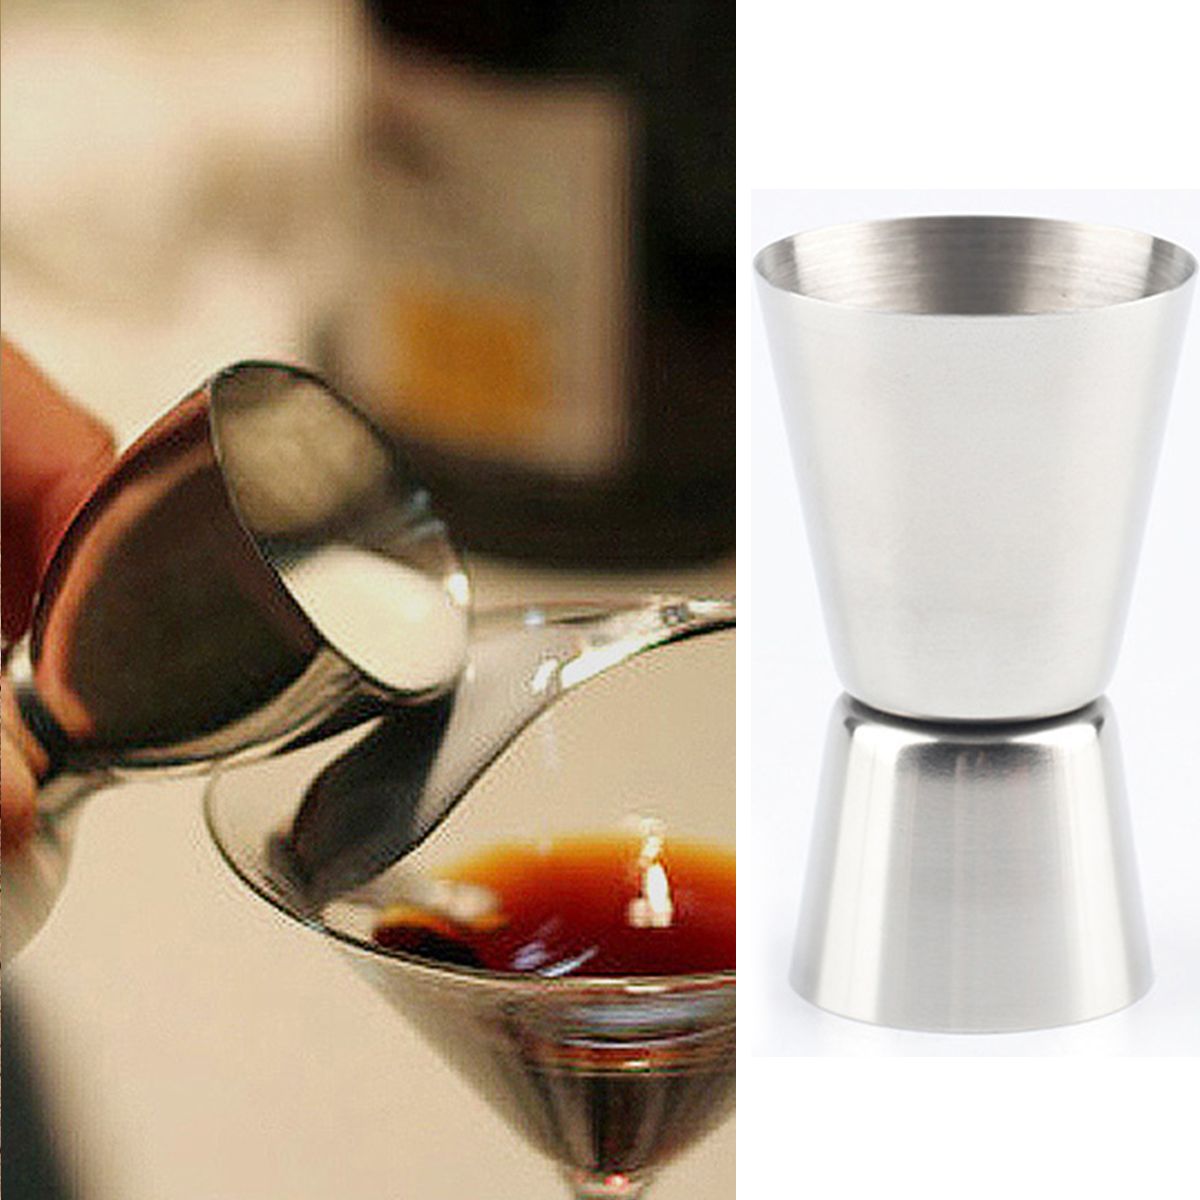 1530ml-Stainless-Steel-Measure-Cup-Drink-Shot-Ounce-Jigger-Bar-Mixed-Cocktail-Tool-1719705